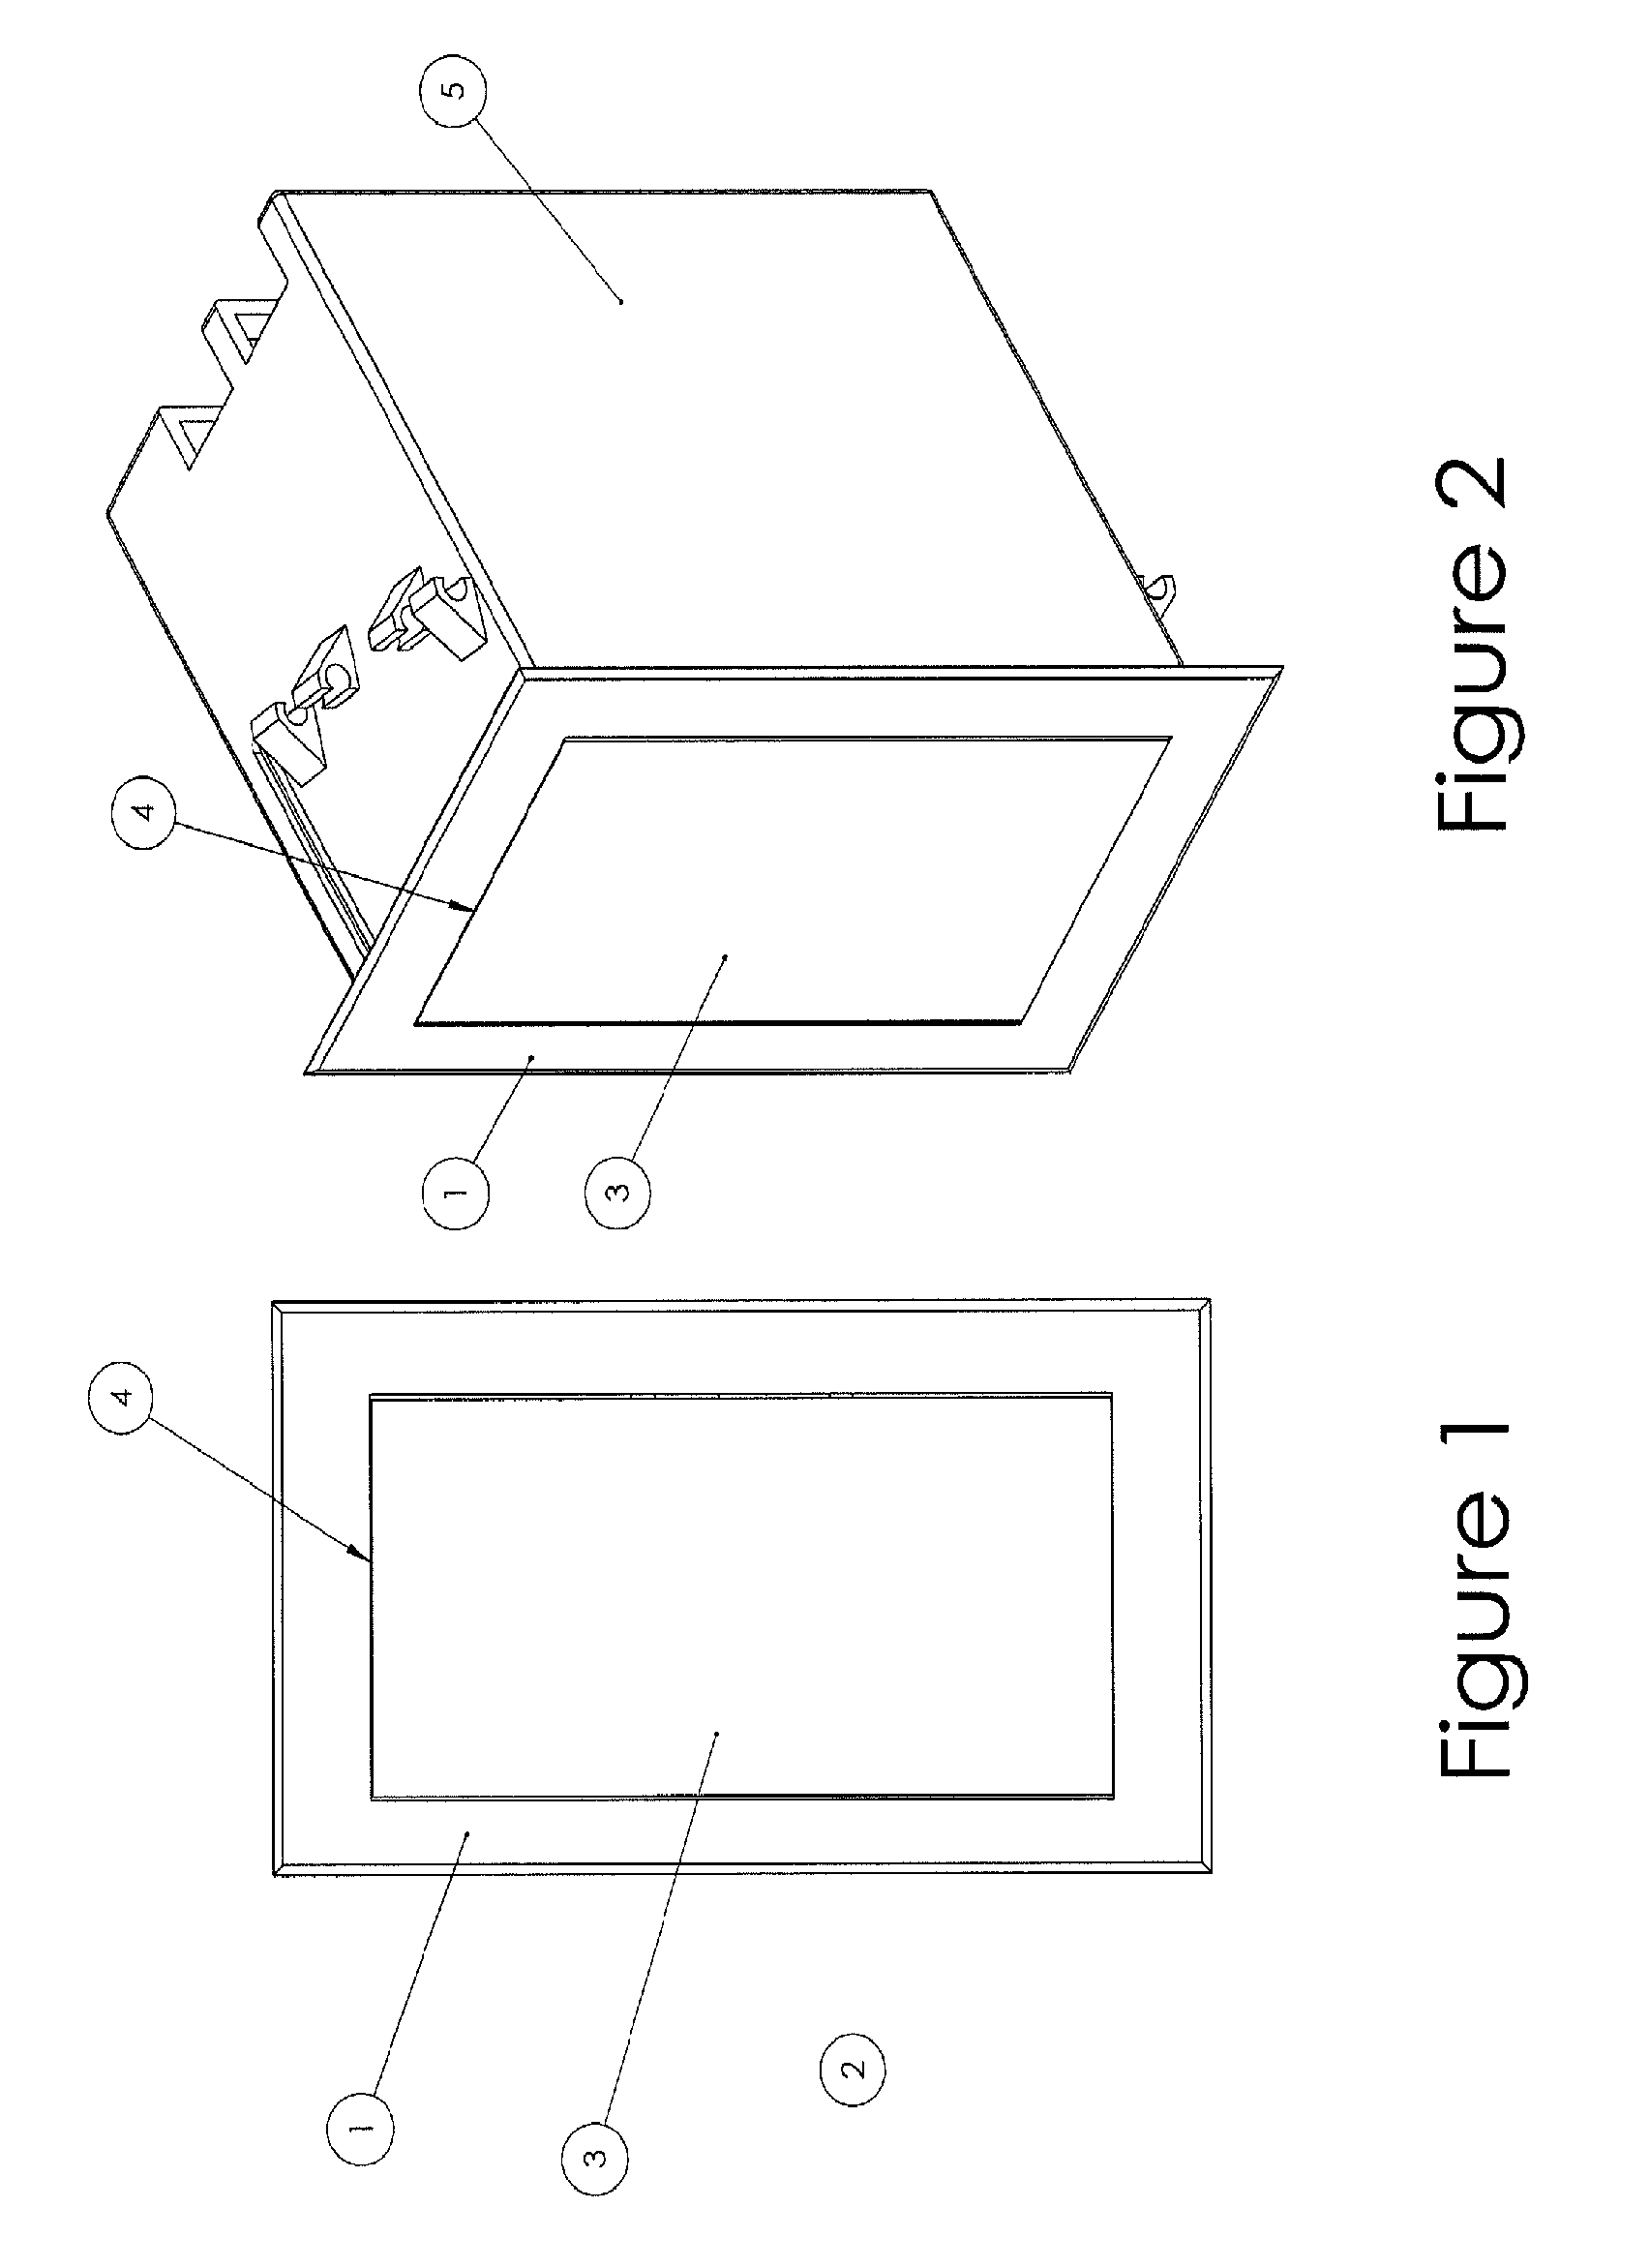 Electrical box, integrated flange and cover mechanisms